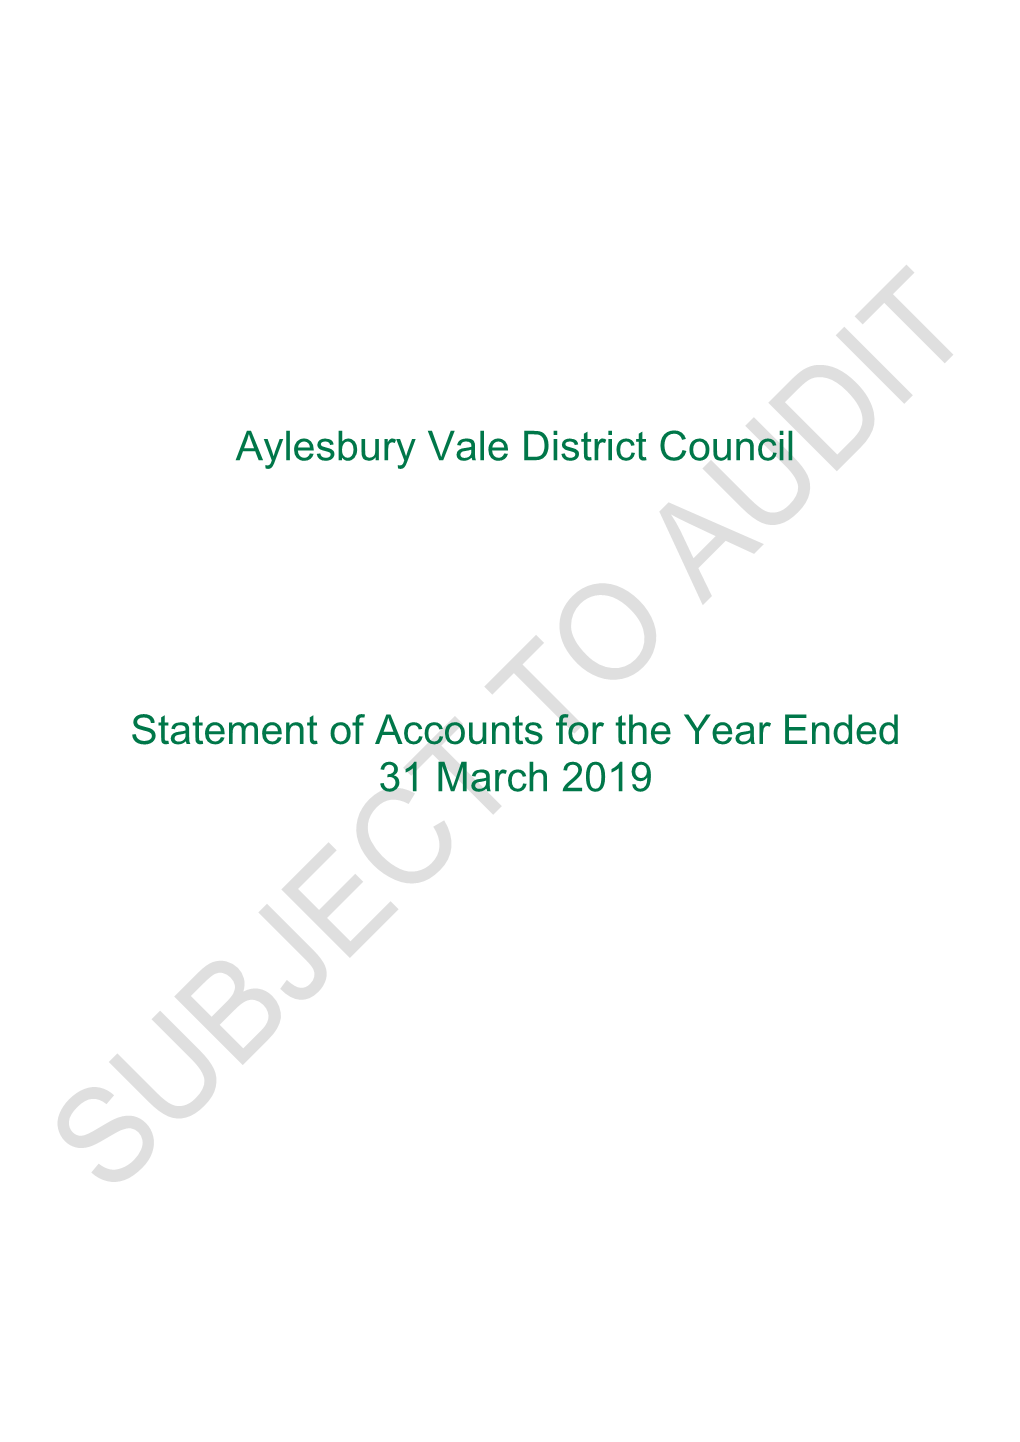 Statement of Accounts for the Year Ended 31 March 2019